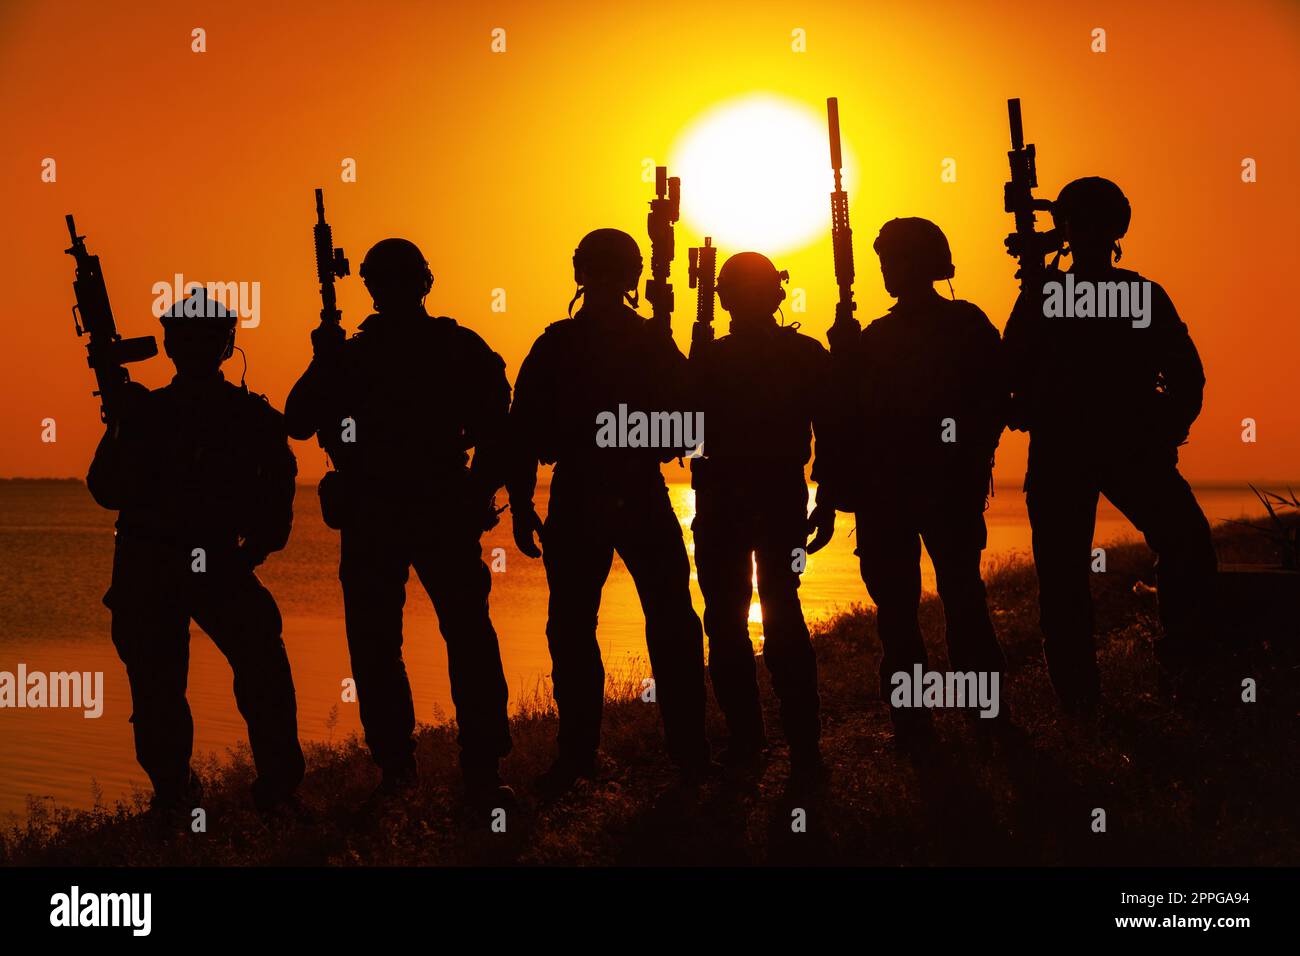 Army soldiers with rifles orange sunset silhouette Stock Photo